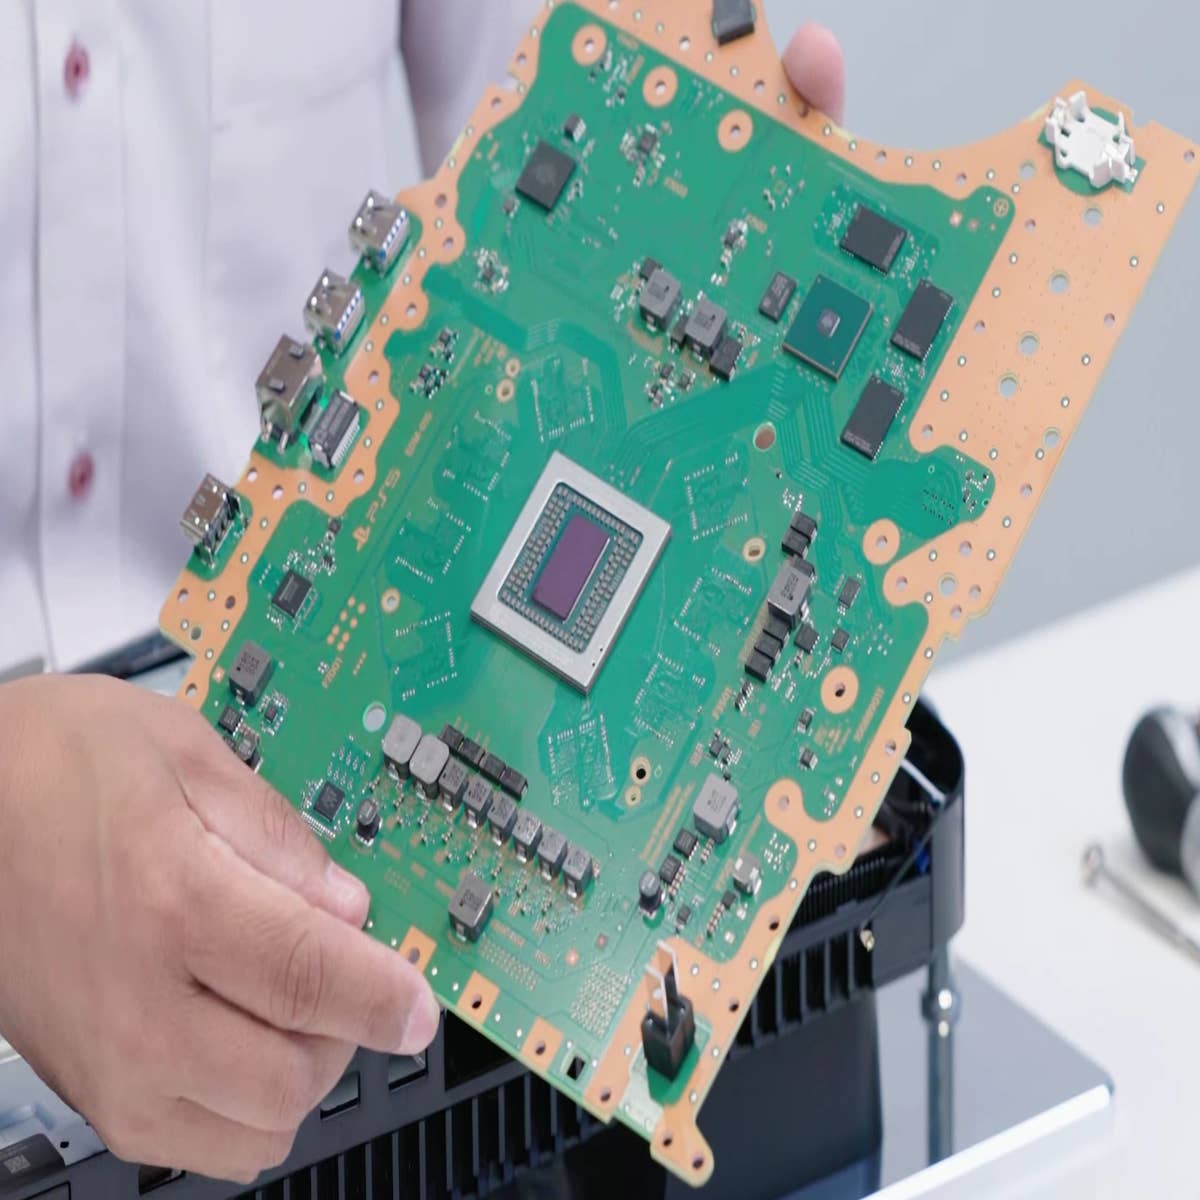 PlayStation Portal Teardown Video Reveals Underpowered Chip, Bad  Repairability and More